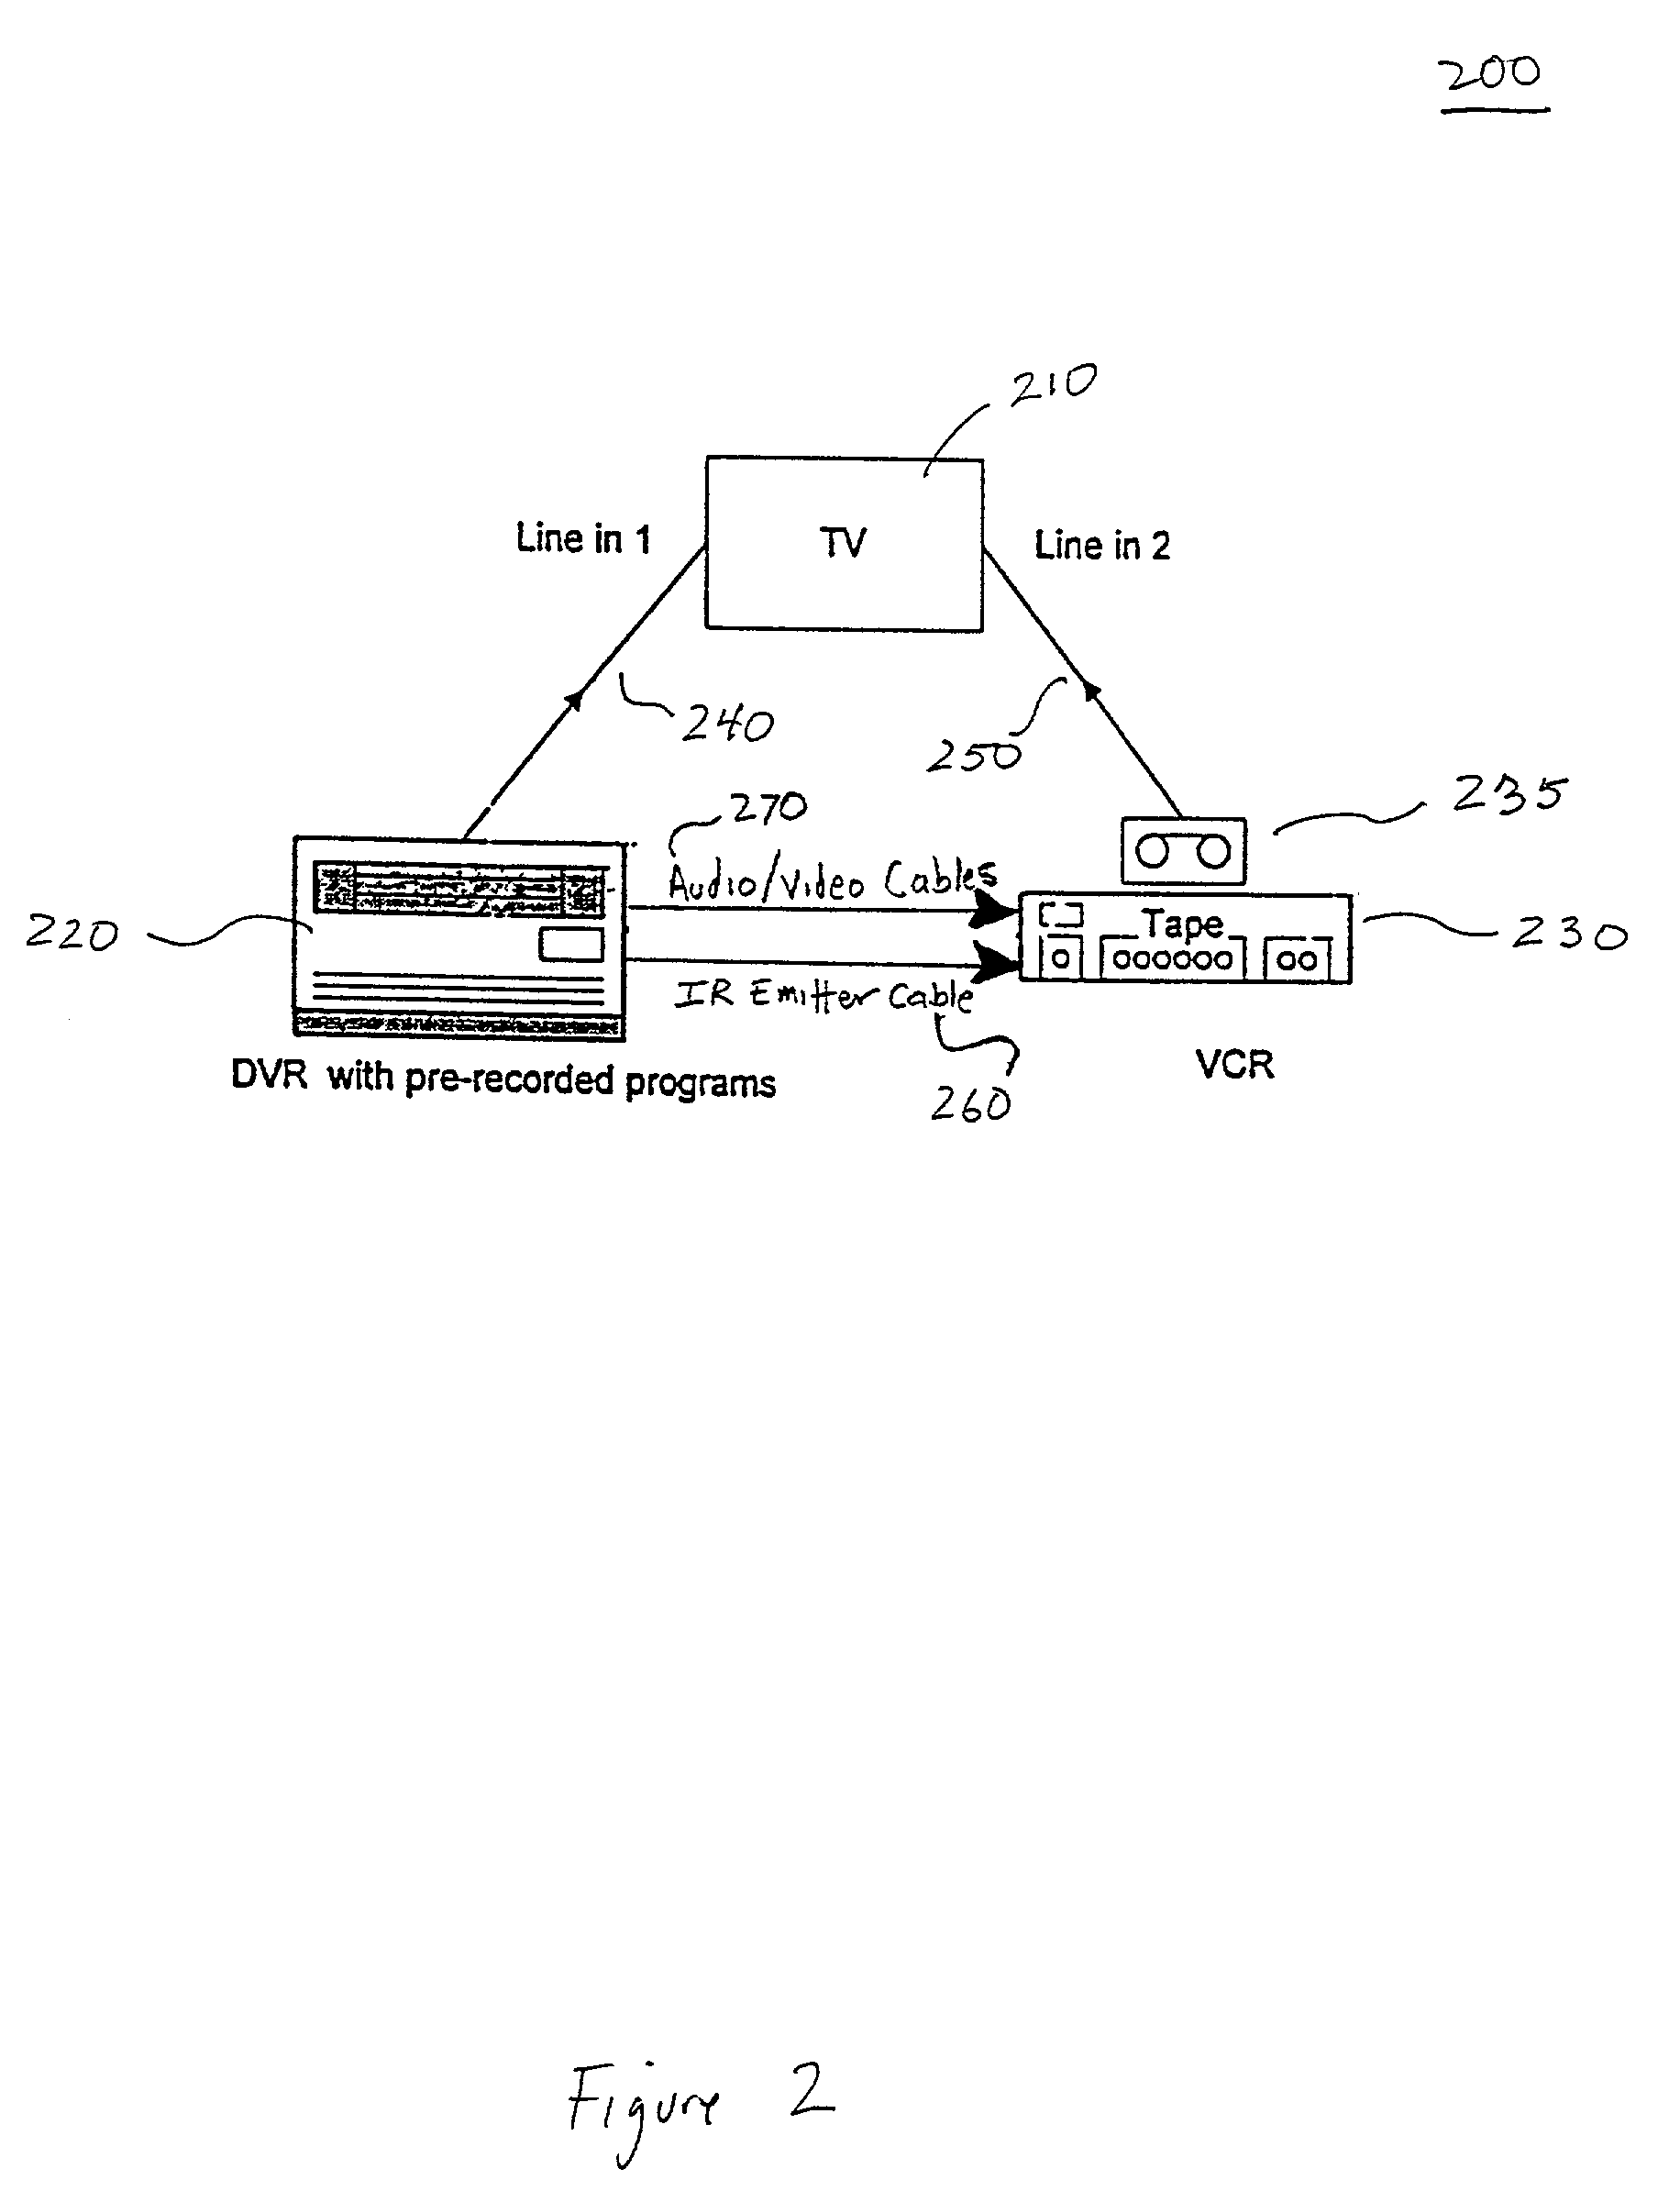 Method and apparatus for automatic transfer of a pre-recorded video program to a video cassette recorder